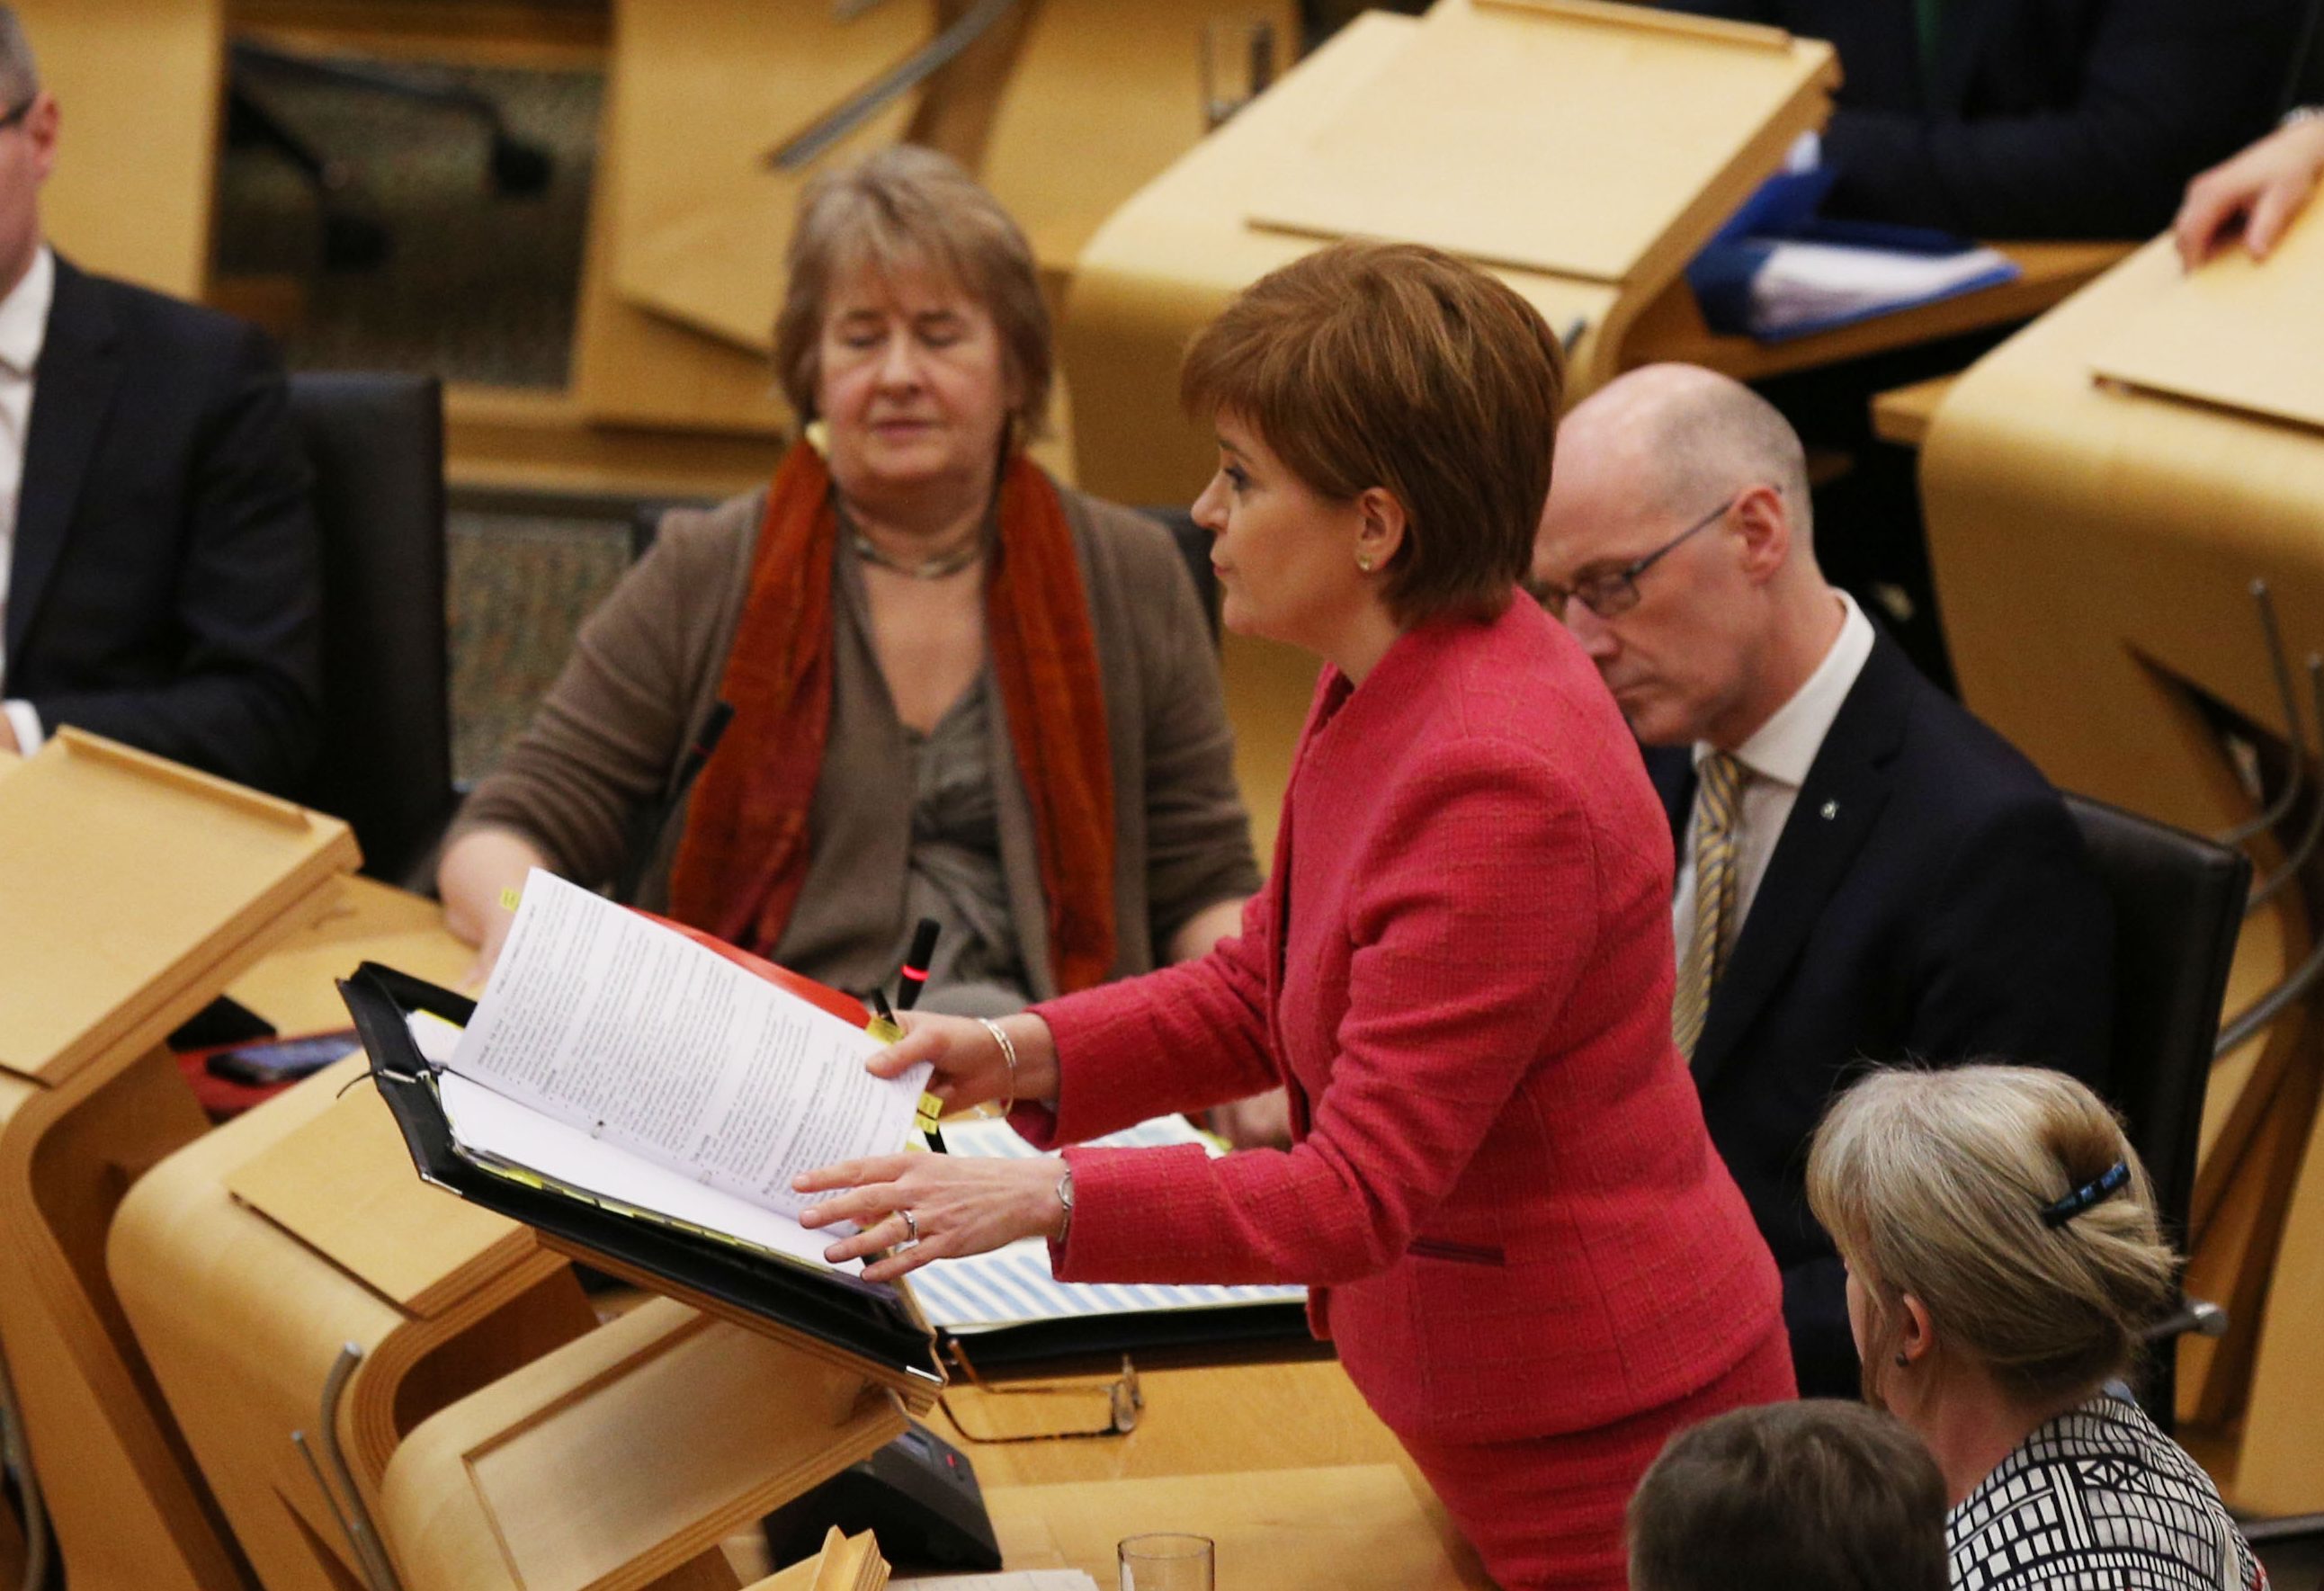 First Minister Nicola Sturgeon in the debating chamber during FMQs at the Scottish Parliament in Edinburgh (David Cheskin/PA Wire)